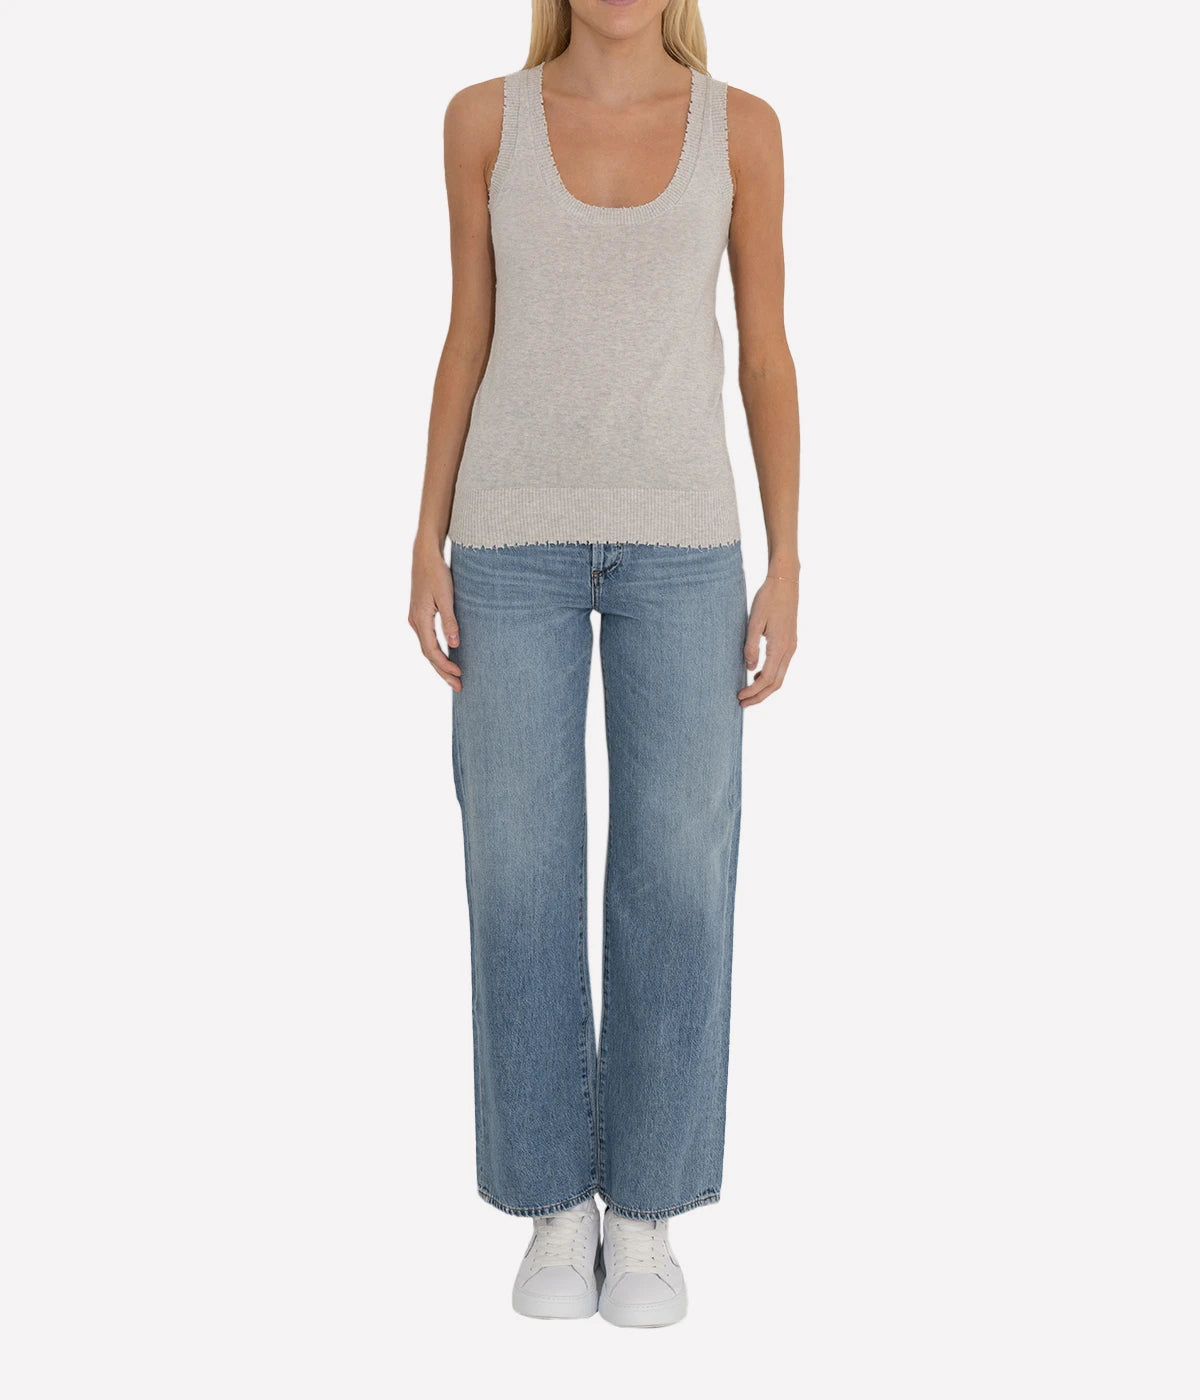 Cashmere Frayed Scoop Neck Tank in Light Heather Grey